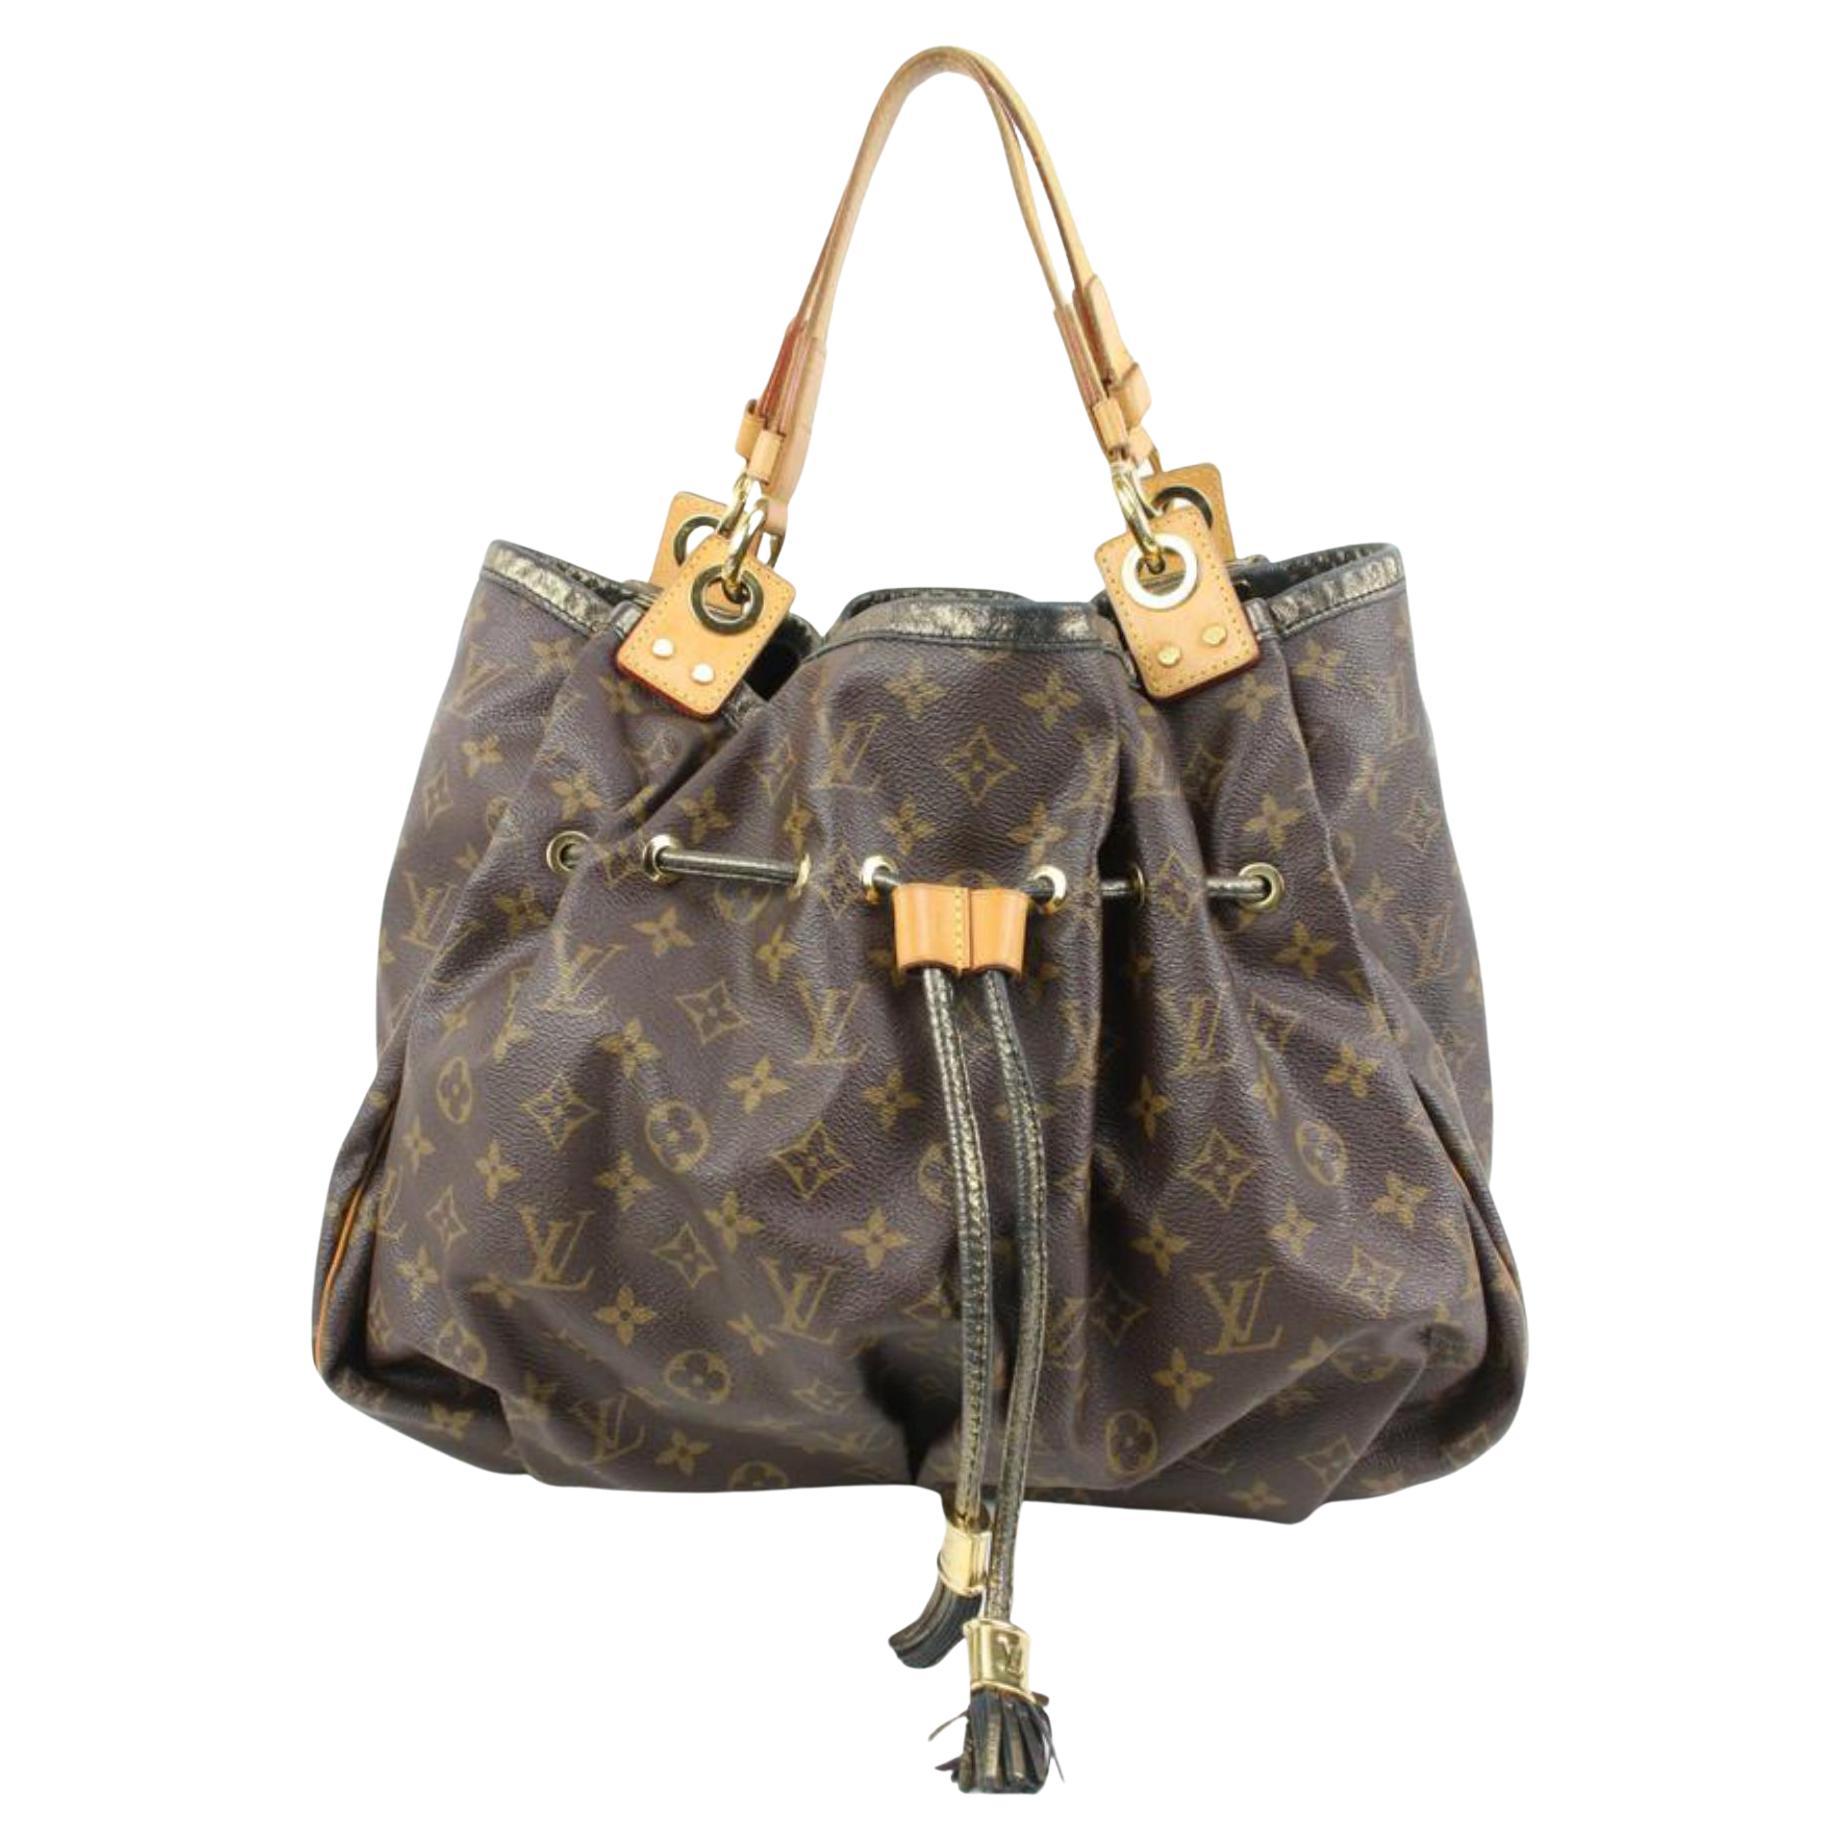 Buy Free Shipping Authentic Pre-owned Louis Vuitton 2009 Limited Monogram  Suede Patent Leather Irene Bag M47928 171872 from Japan - Buy authentic  Plus exclusive items from Japan